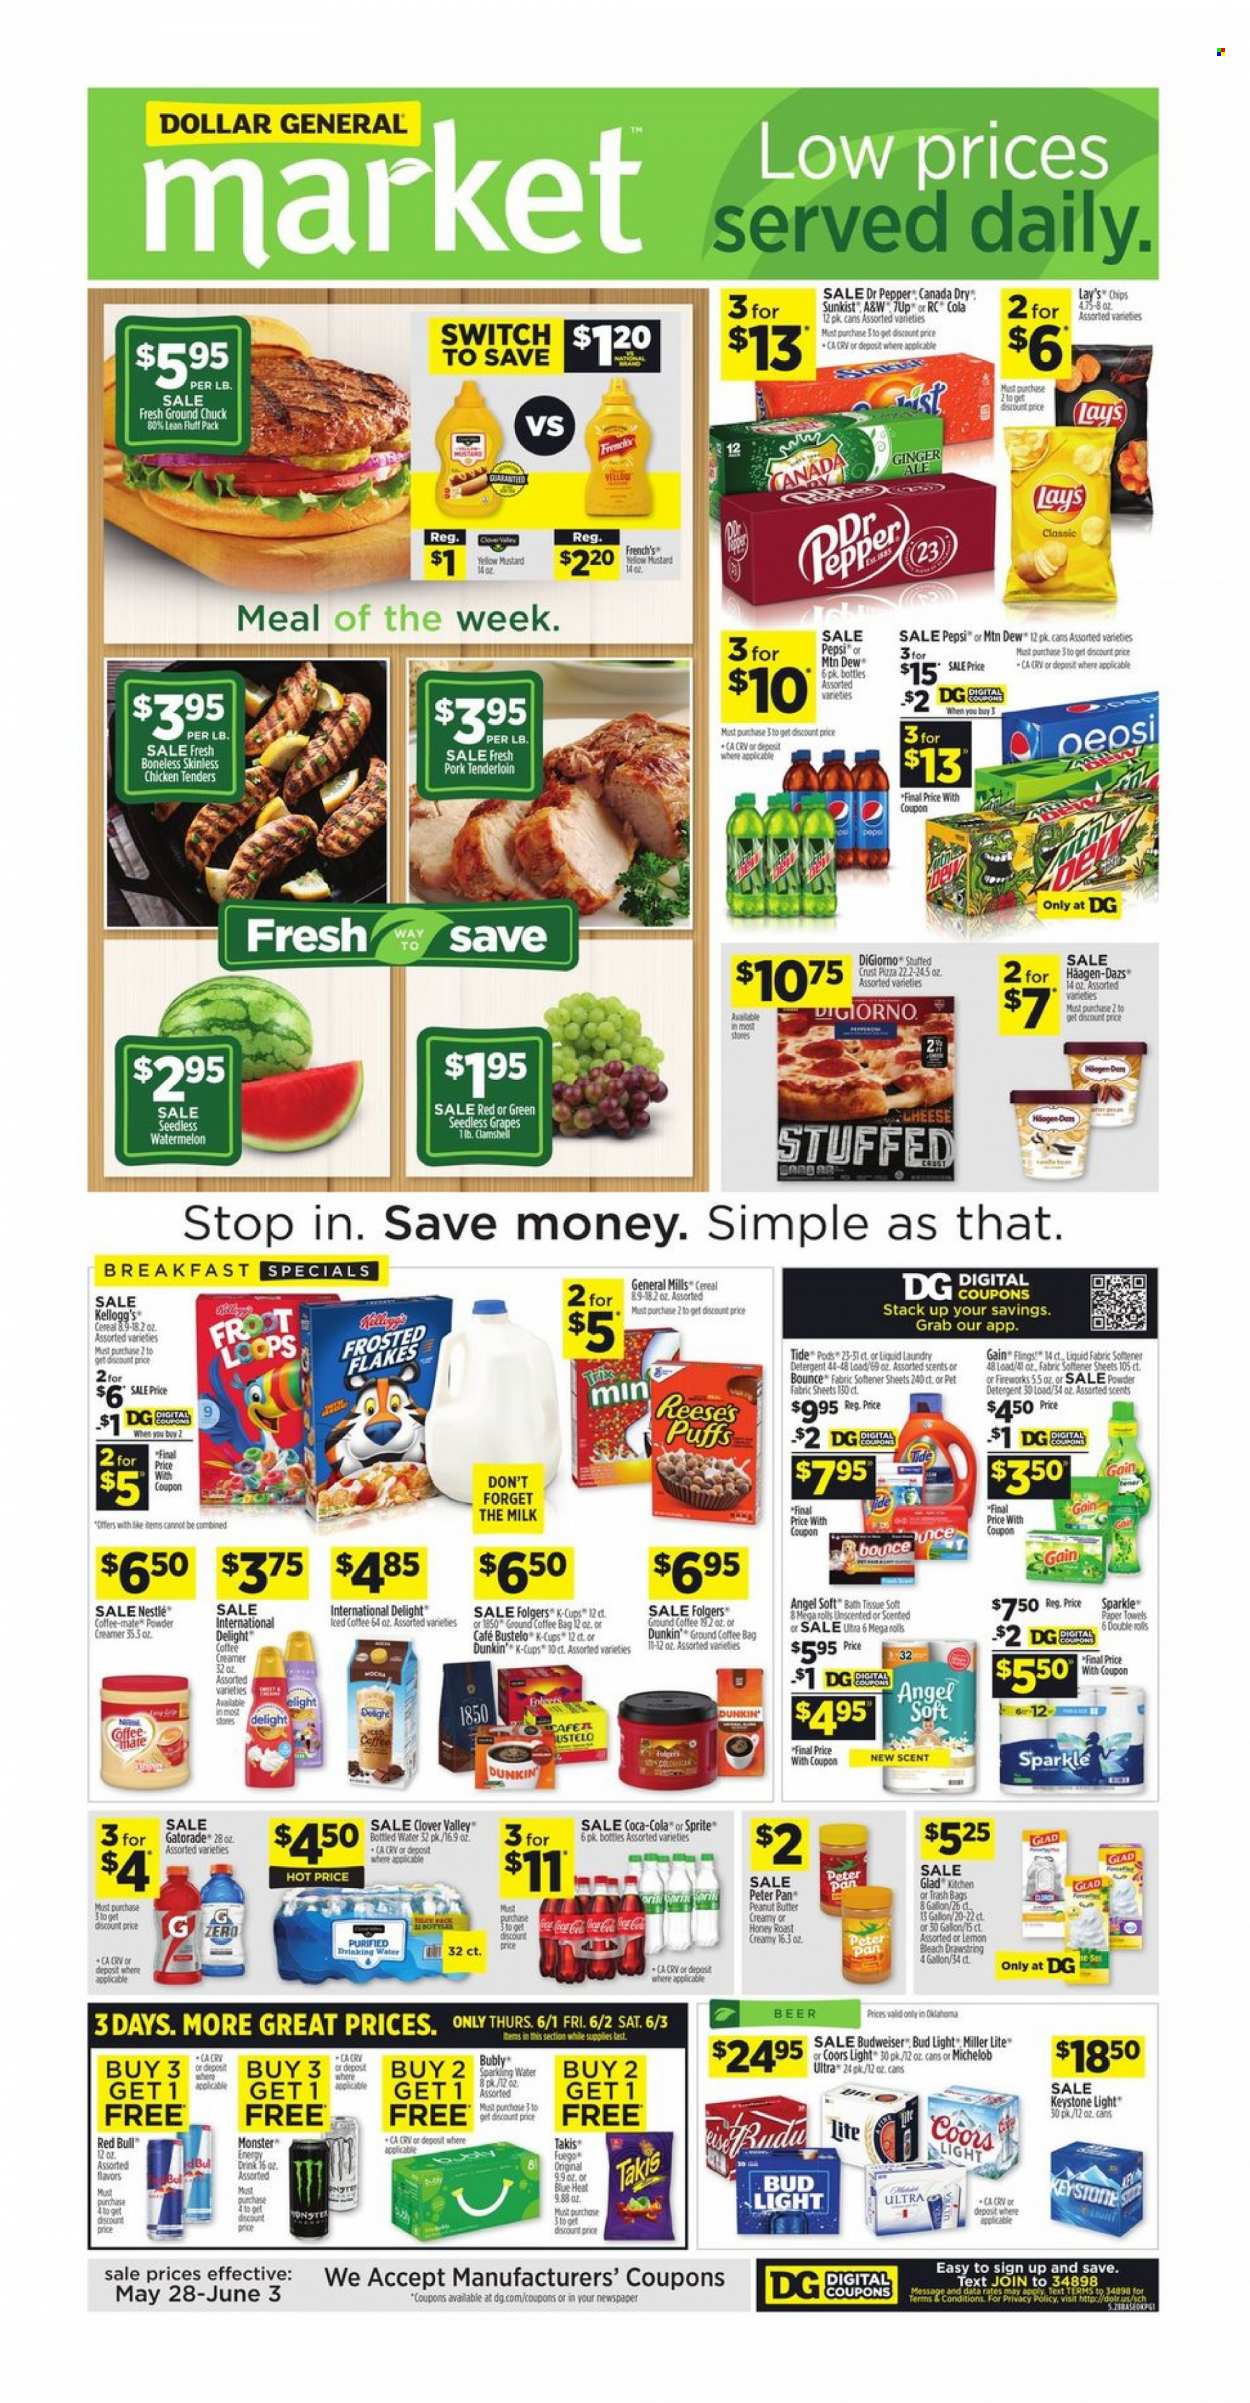 thumbnail - Dollar General Flyer - 05/28/2023 - 06/03/2023 - Sales products - puffs, grapes, seedless grapes, watermelon, pizza, chicken tenders, roast, ready meal, Clover, Coffee-Mate, milk, creamer, Reese's, Häagen-Dazs, Nestlé, Kellogg's, General Mills, chips, Lay’s, cereals, Frosted Flakes, mustard, peanut butter, Canada Dry, ginger ale, Mountain Dew, Sprite, Pepsi, energy drink, Monster, Dr. Pepper, soft drink, 7UP, Red Bull, Monster Energy, A&W, Gatorade, sparkling water, bottled water, water, Folgers, ground coffee, coffee capsules, K-Cups, alcohol, beer, Bud Light, Keystone, ground chuck, pork meat, pork tenderloin, bath tissue, kitchen towels, paper towels, detergent, Gain, bleach, Tide, fabric softener, laundry detergent, Bounce, trash bags, pan, electrolyte drink, Budweiser, Miller Lite, Coors, Michelob. Page 1.